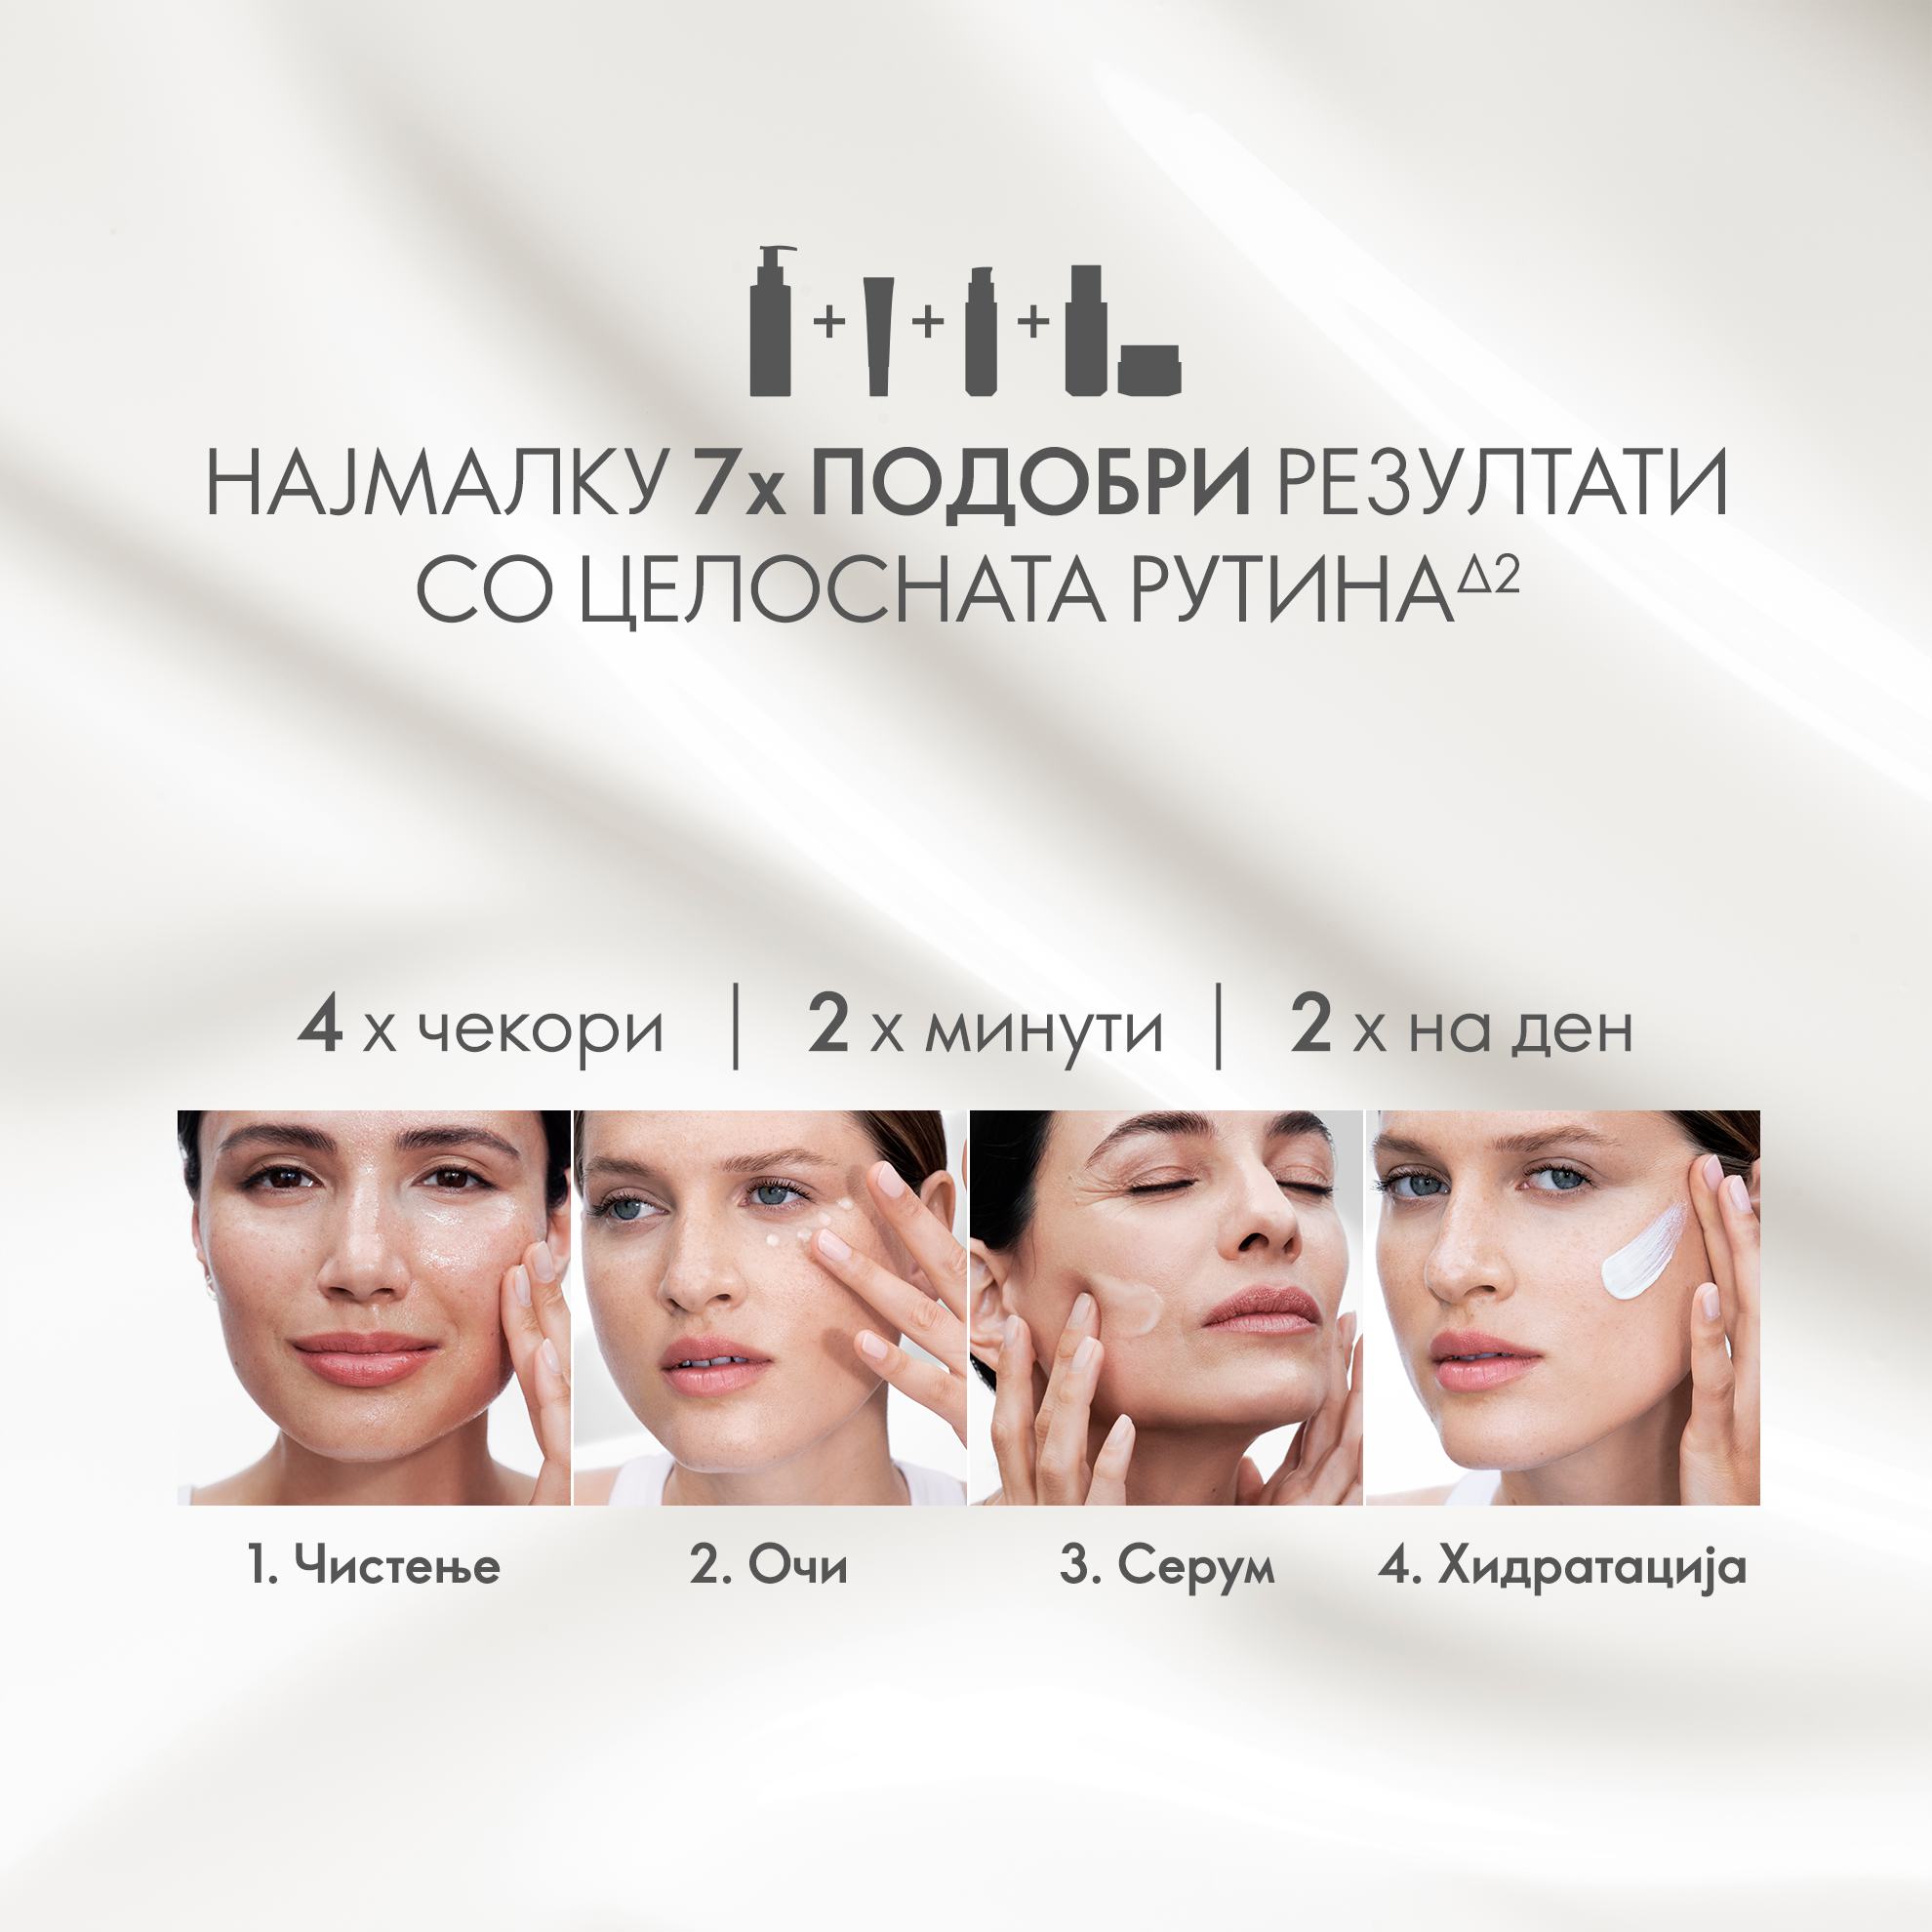 https://media-cdn.oriflame.com/productImage?externalMediaId=product-management-media%2fProducts%2f45608%2fMK%2f45608_5.png&id=17553004&version=2